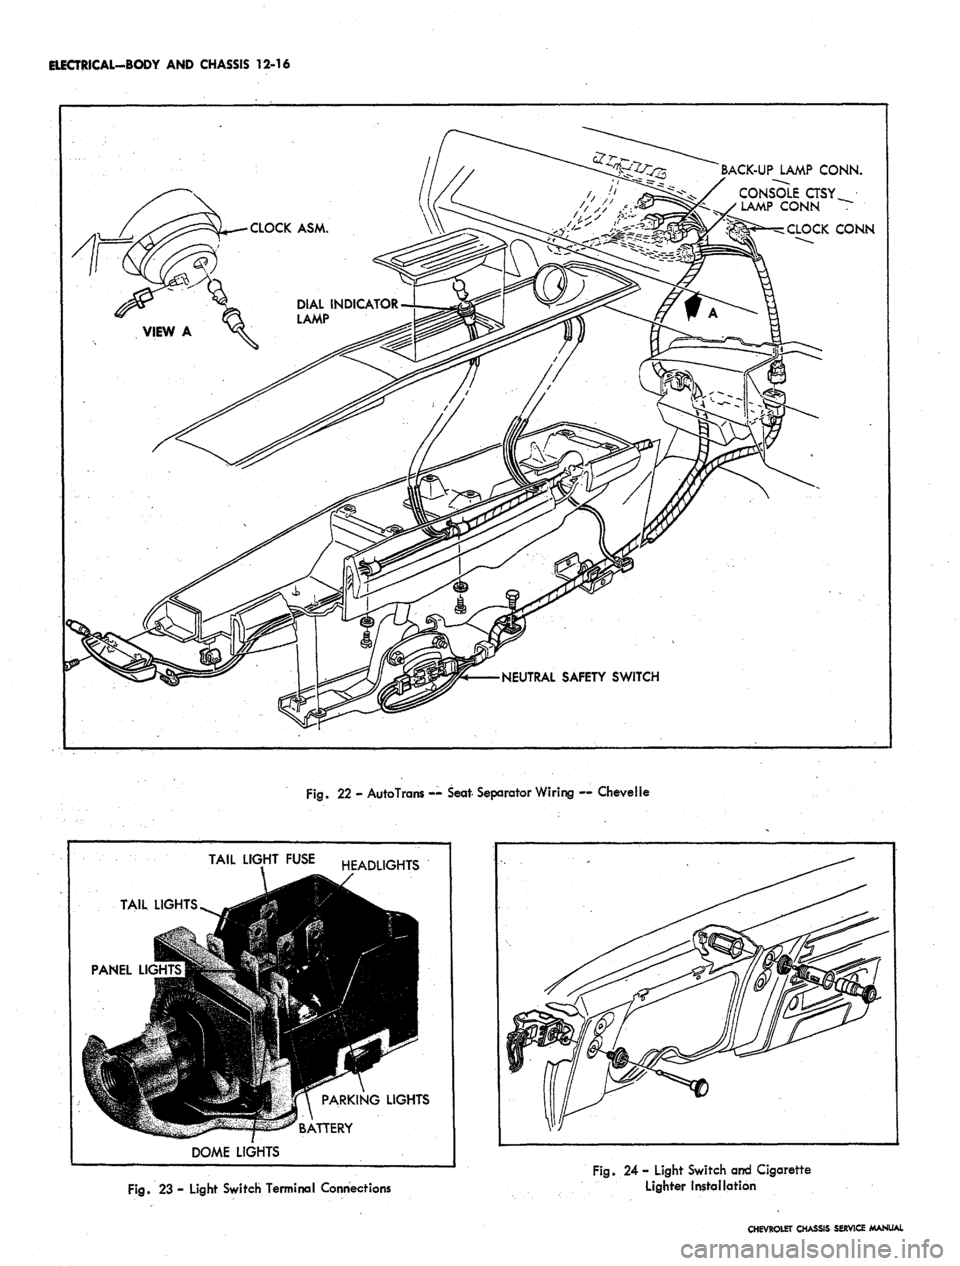 CHEVROLET CAMARO 1967 1.G Chassis Workshop Manual 
ELECTRICAL-BODY AND CHASSIS 12-16

BACK-UP LAMP CONN.

CONSOLE CTSY

LAMP CONN

CLOCK CONN

NEUTRAL SAFETY SWITCH

Fig.
 22 - AutoTrans — Seat- Separator Wiring — Chevelle

TAIL

PANEL Ll<

J 
TA